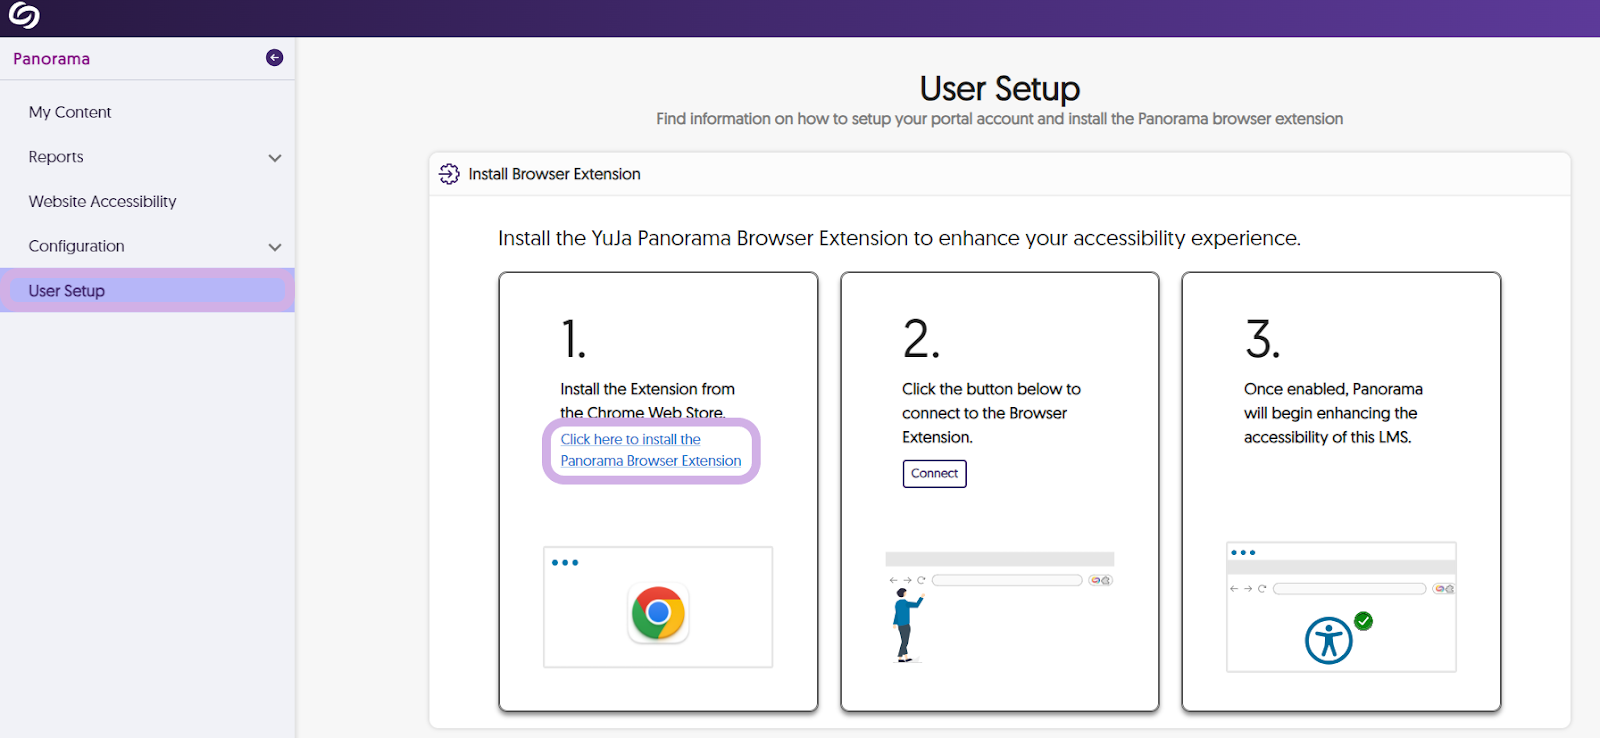 Panorama User Setup page. Step one is highlighted.